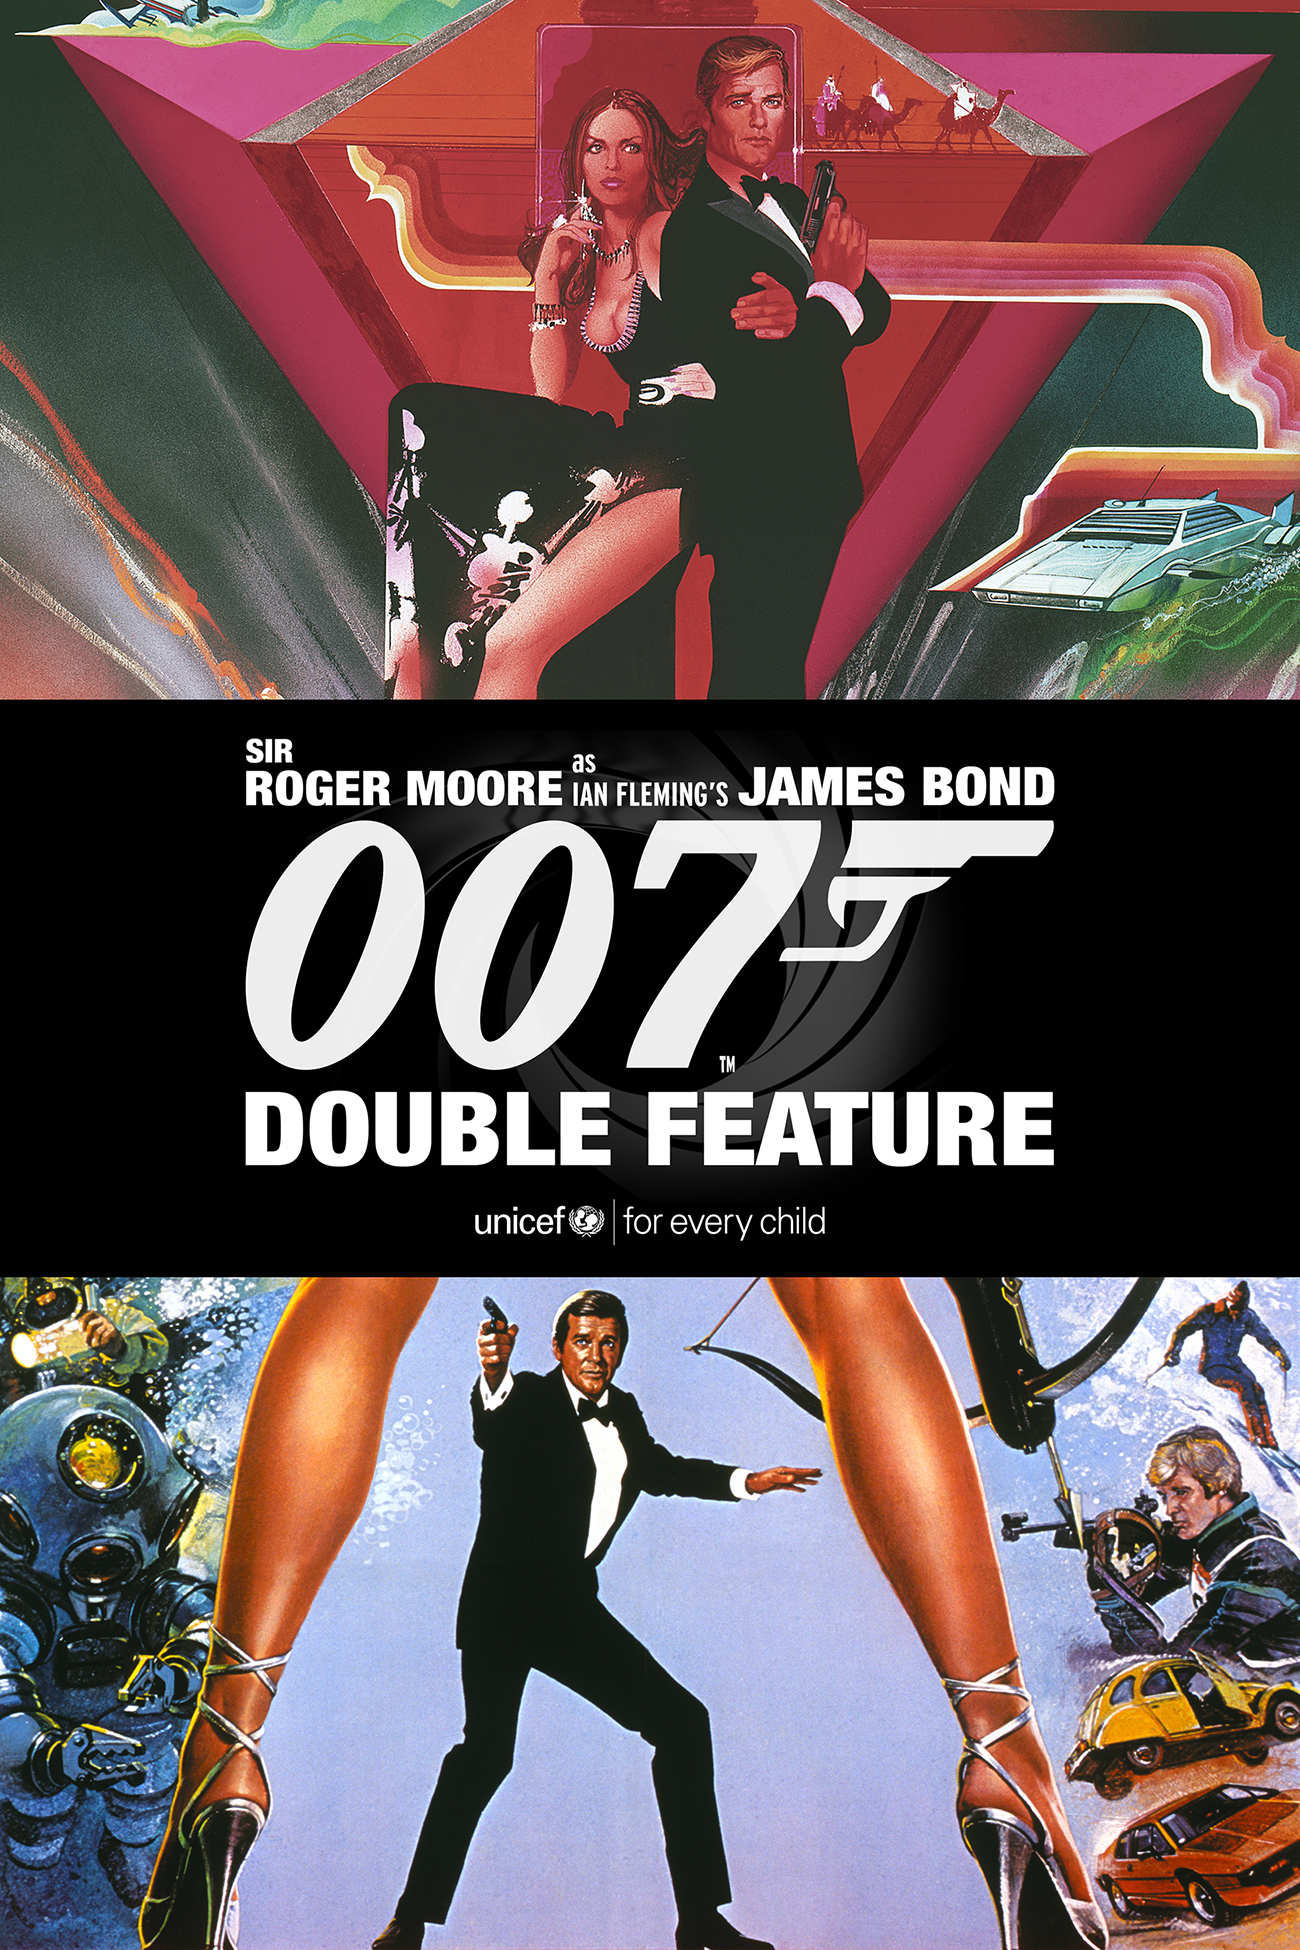 A 007 Double Feature at an AMC Theatre near you.